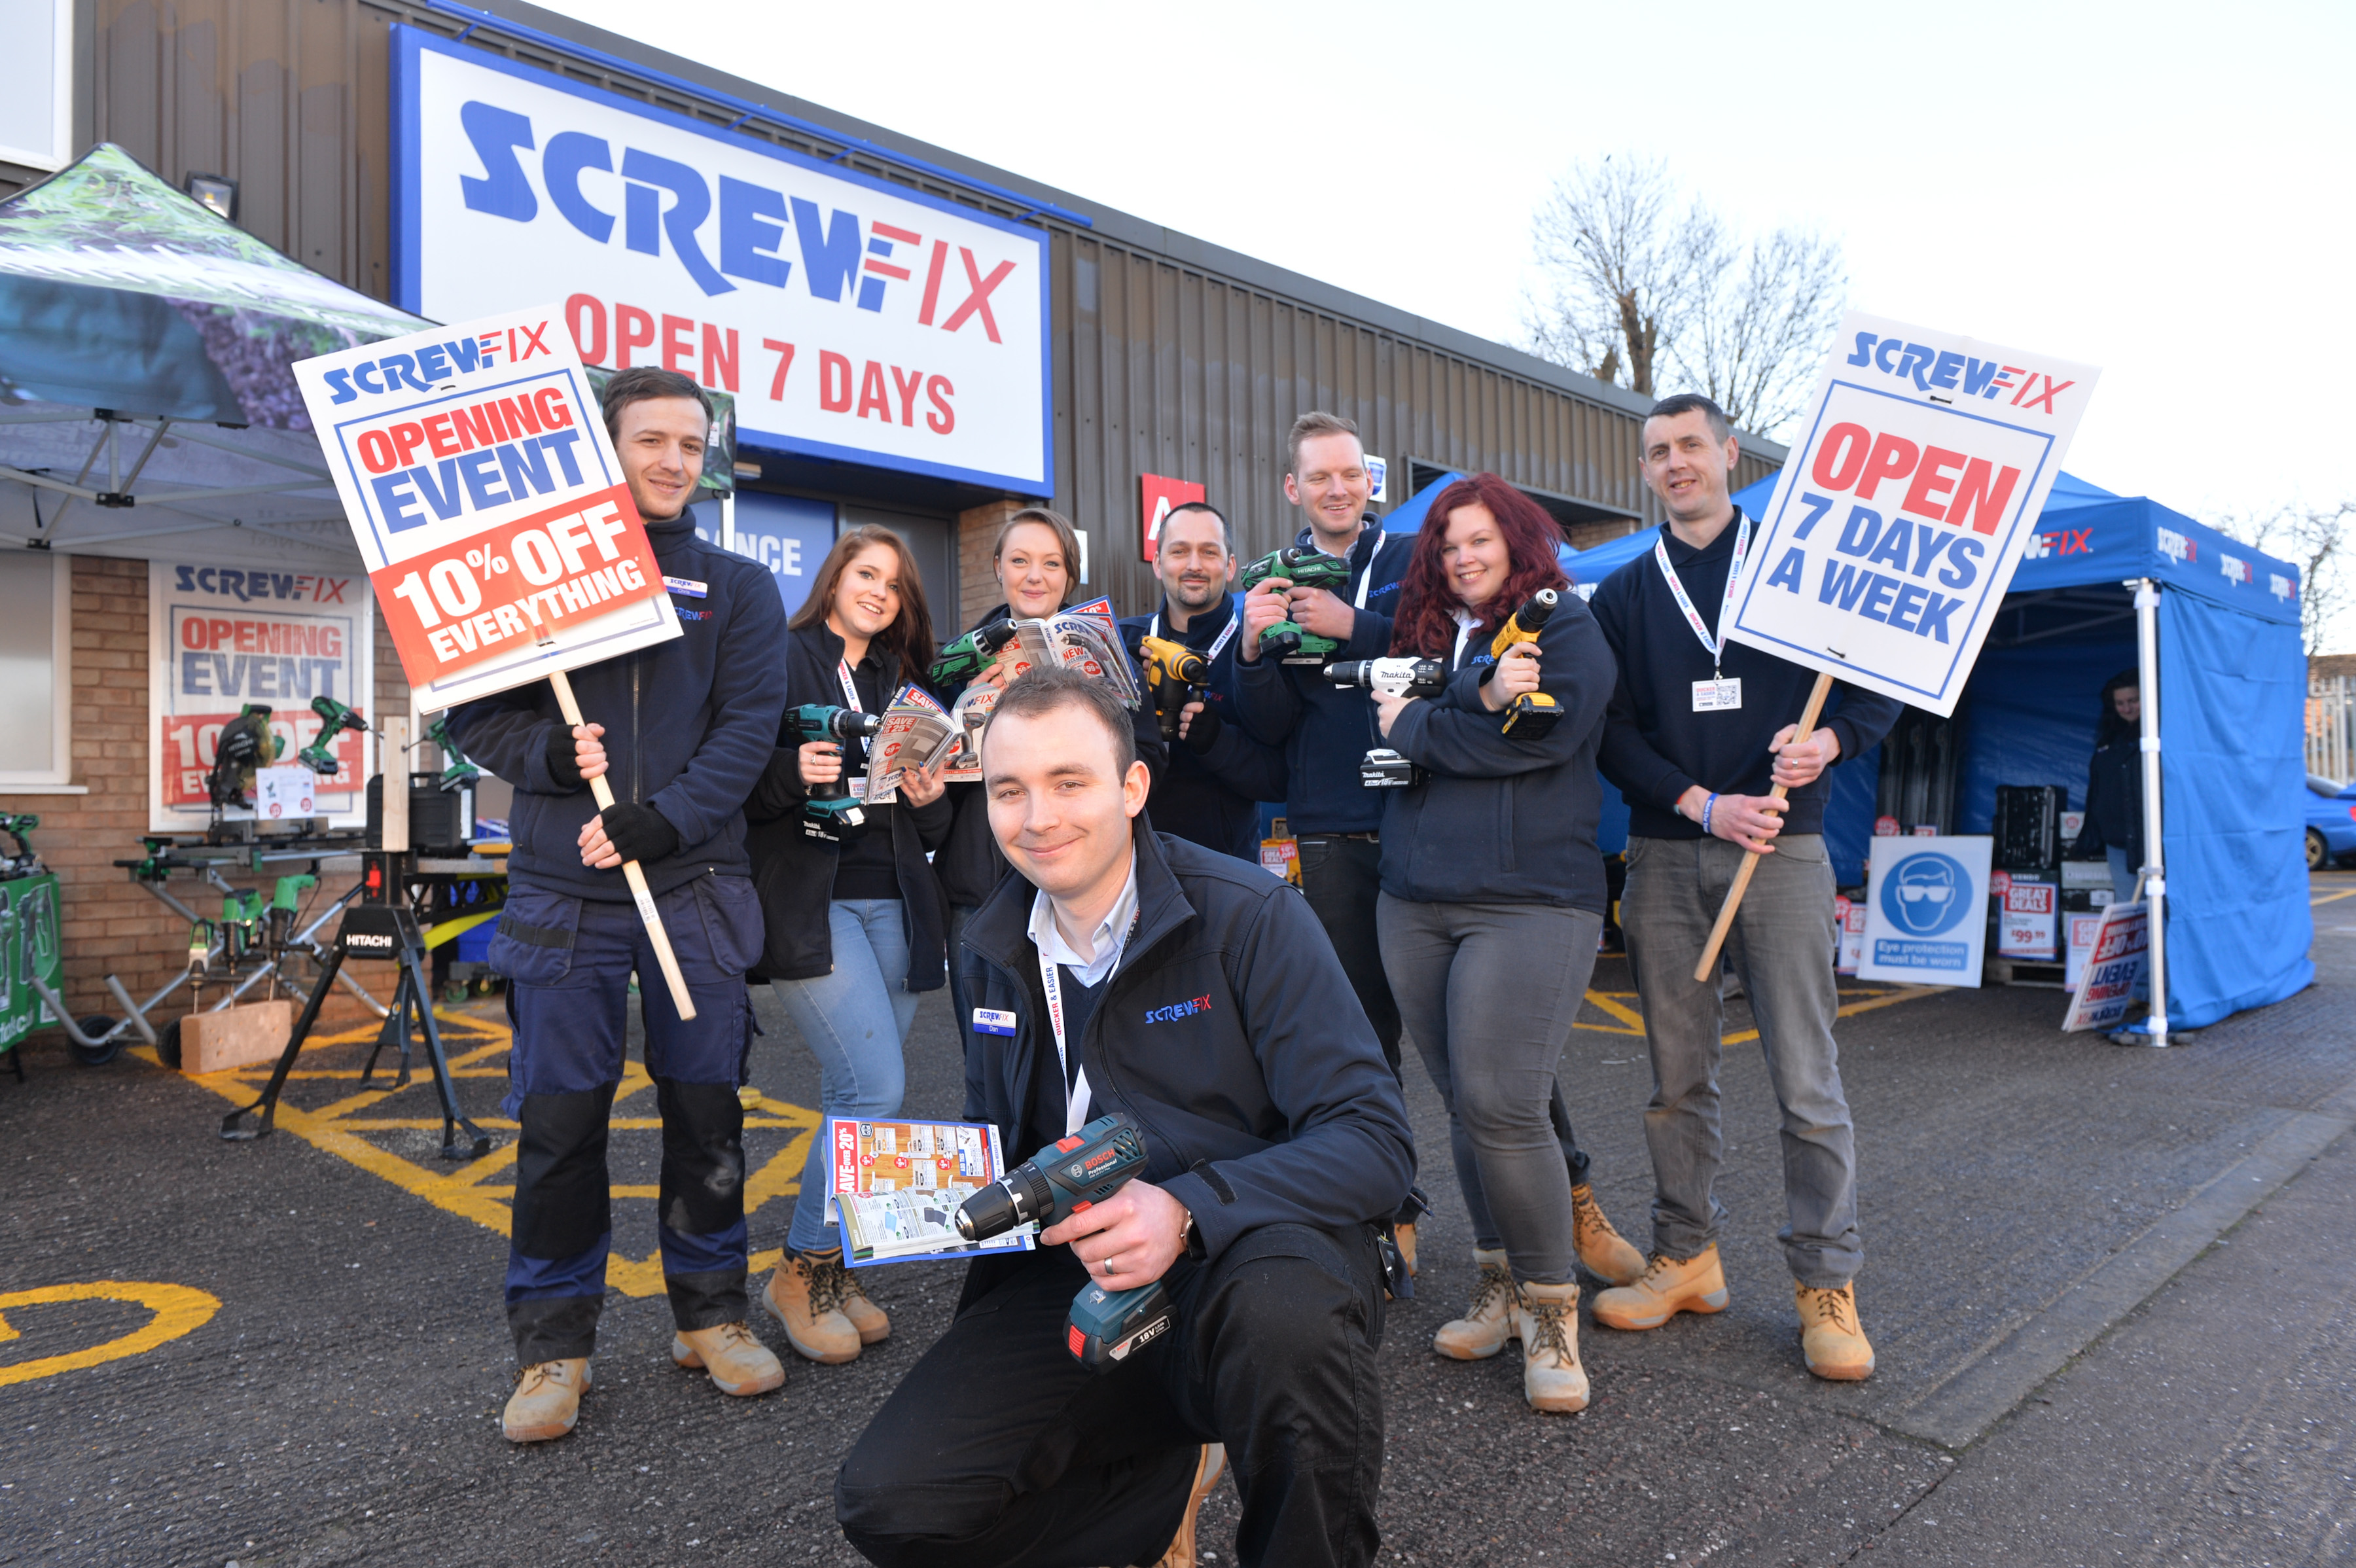 Rugeley’s first Screwfix store is declared a runaway success